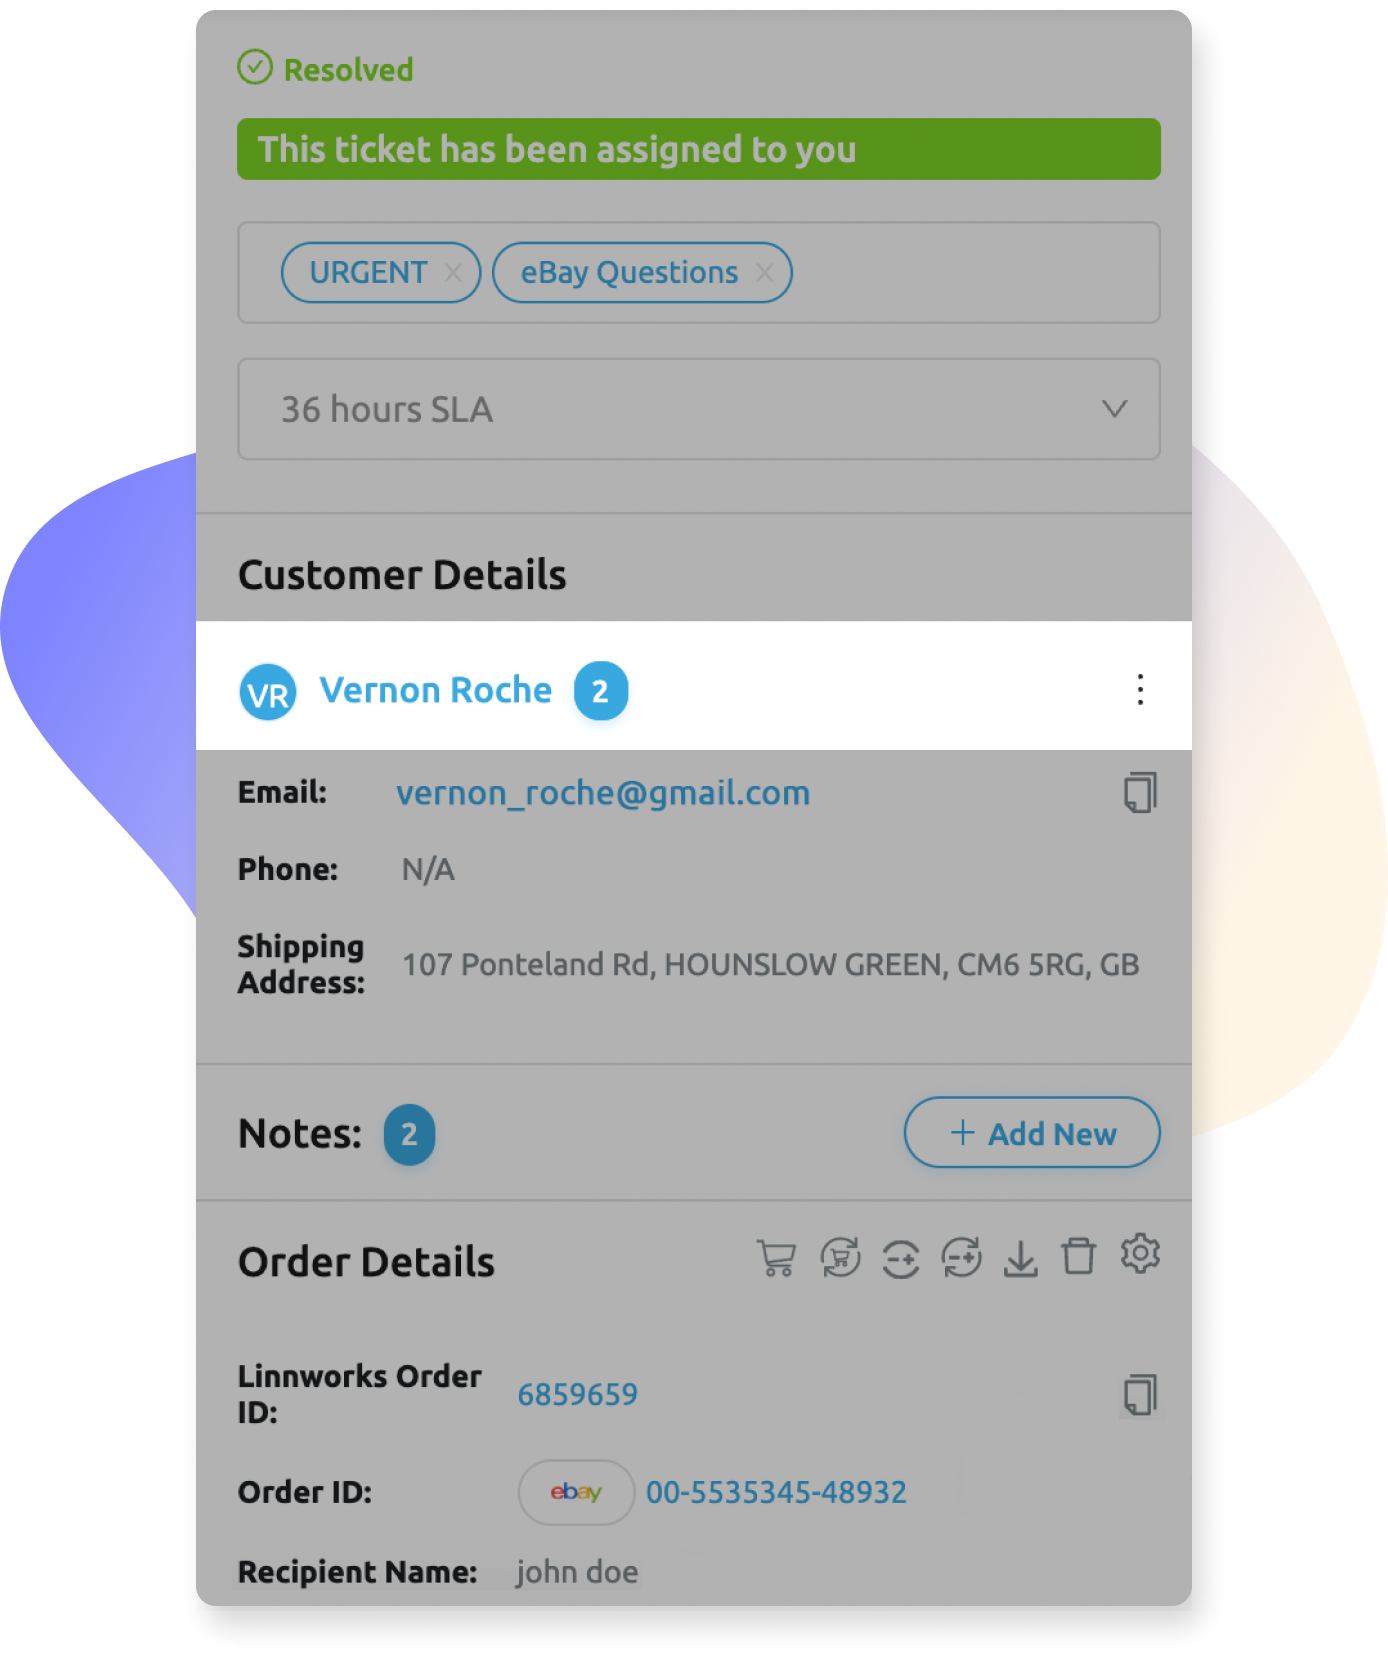 Replyco Helpdesk for eCommerce View complete customer order and message history